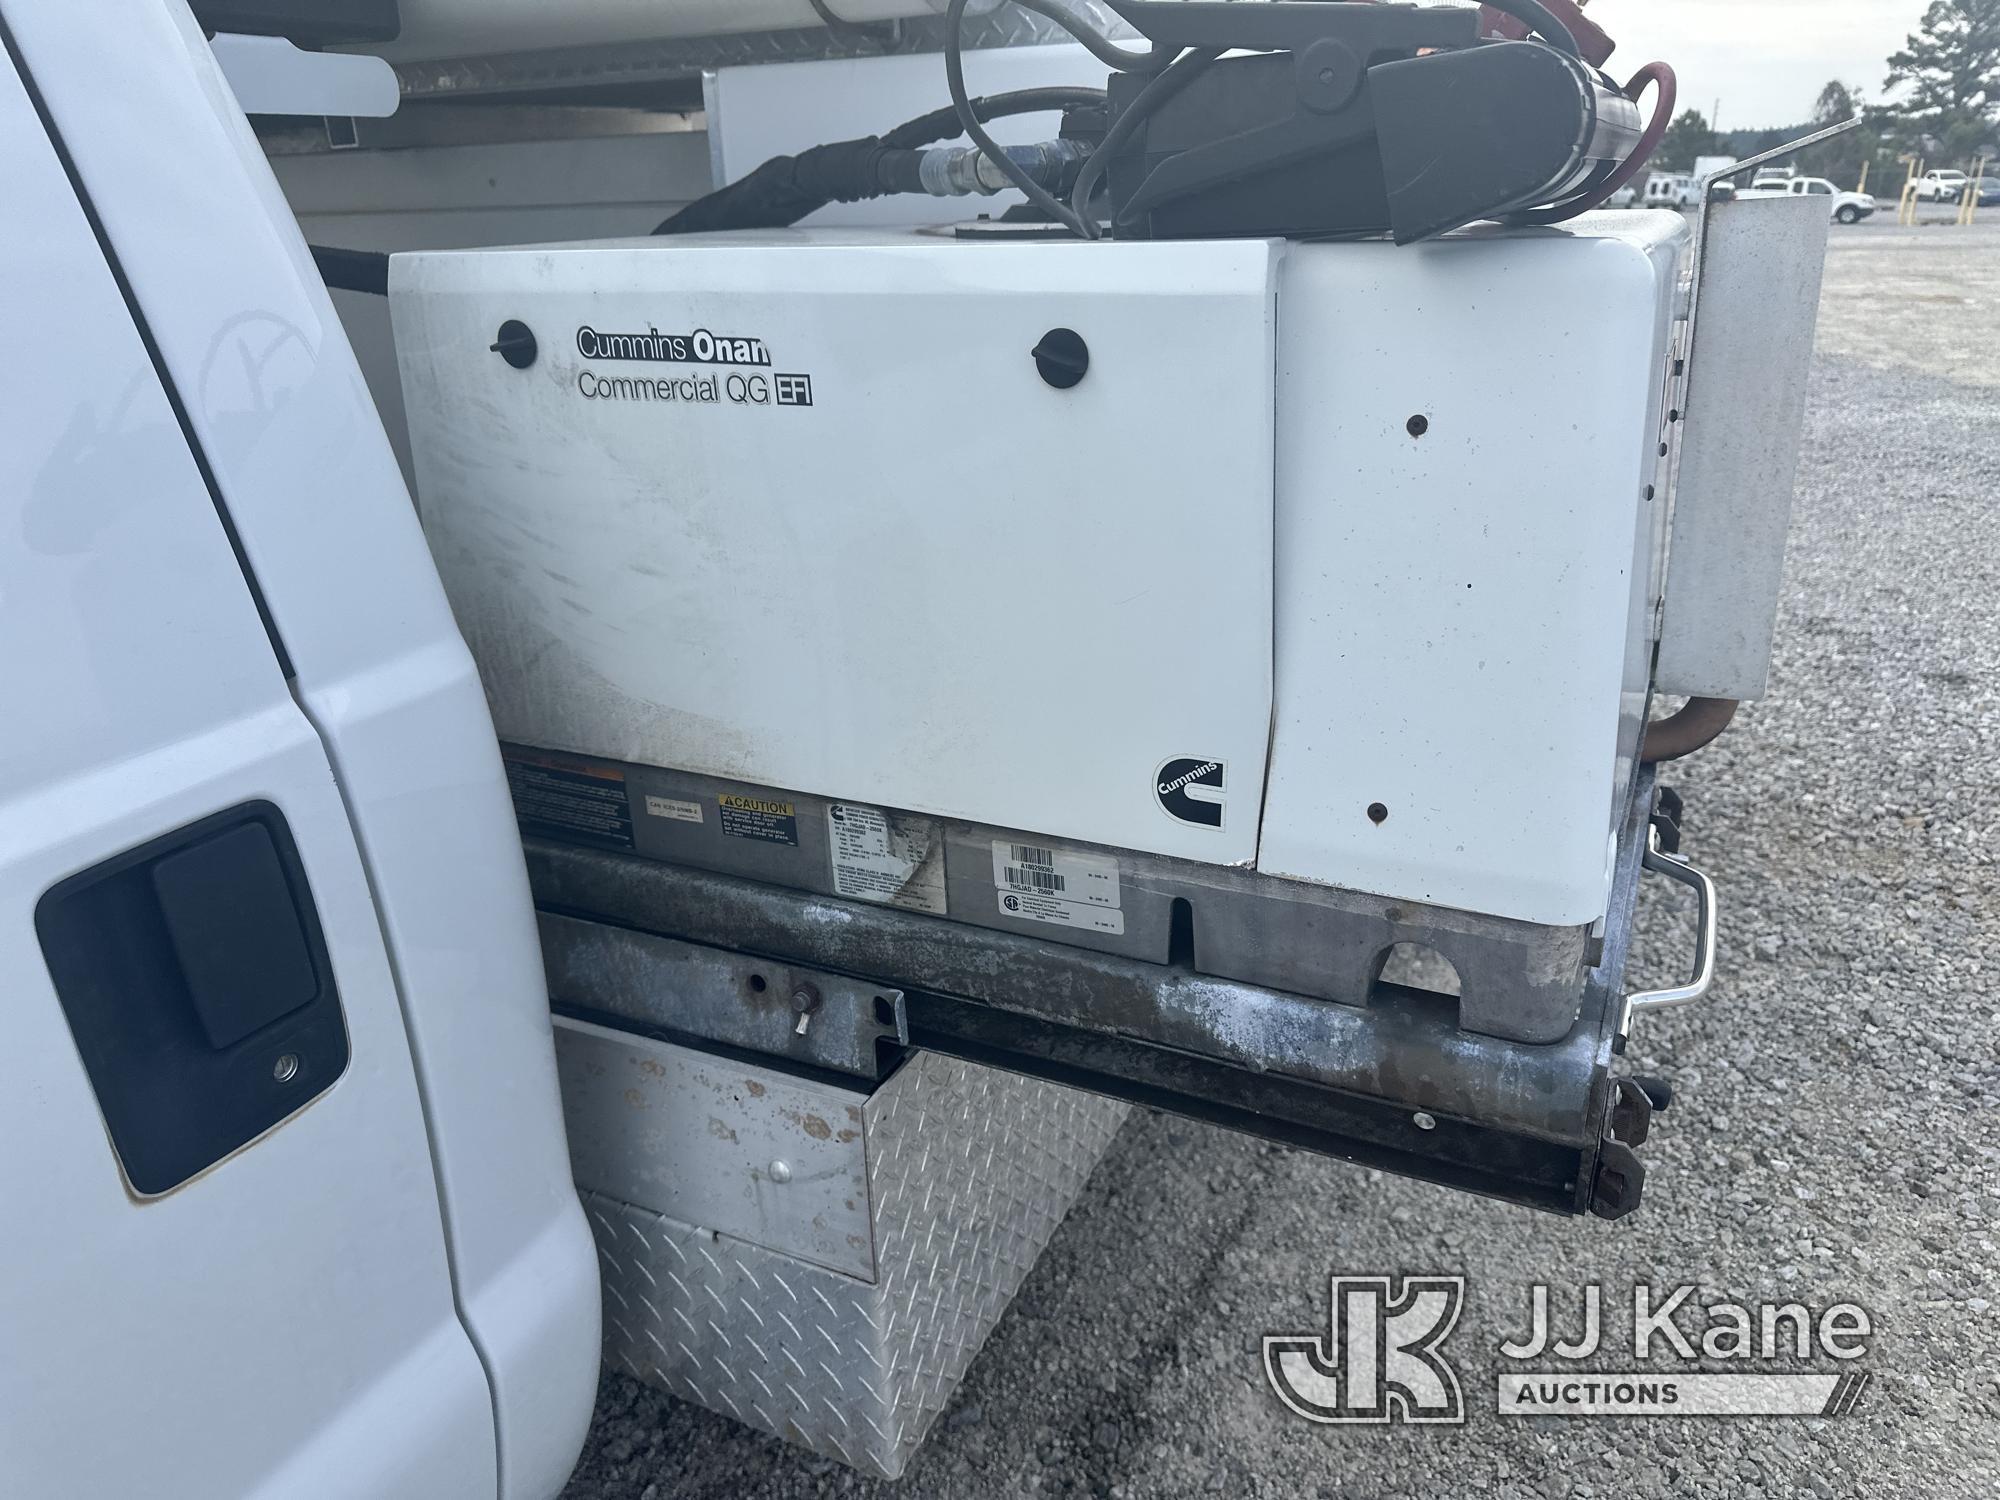 (Villa Rica, GA) Altec AT200-A, Telescopic Non-Insulated Bucket Truck mounted behind cab on 2012 For